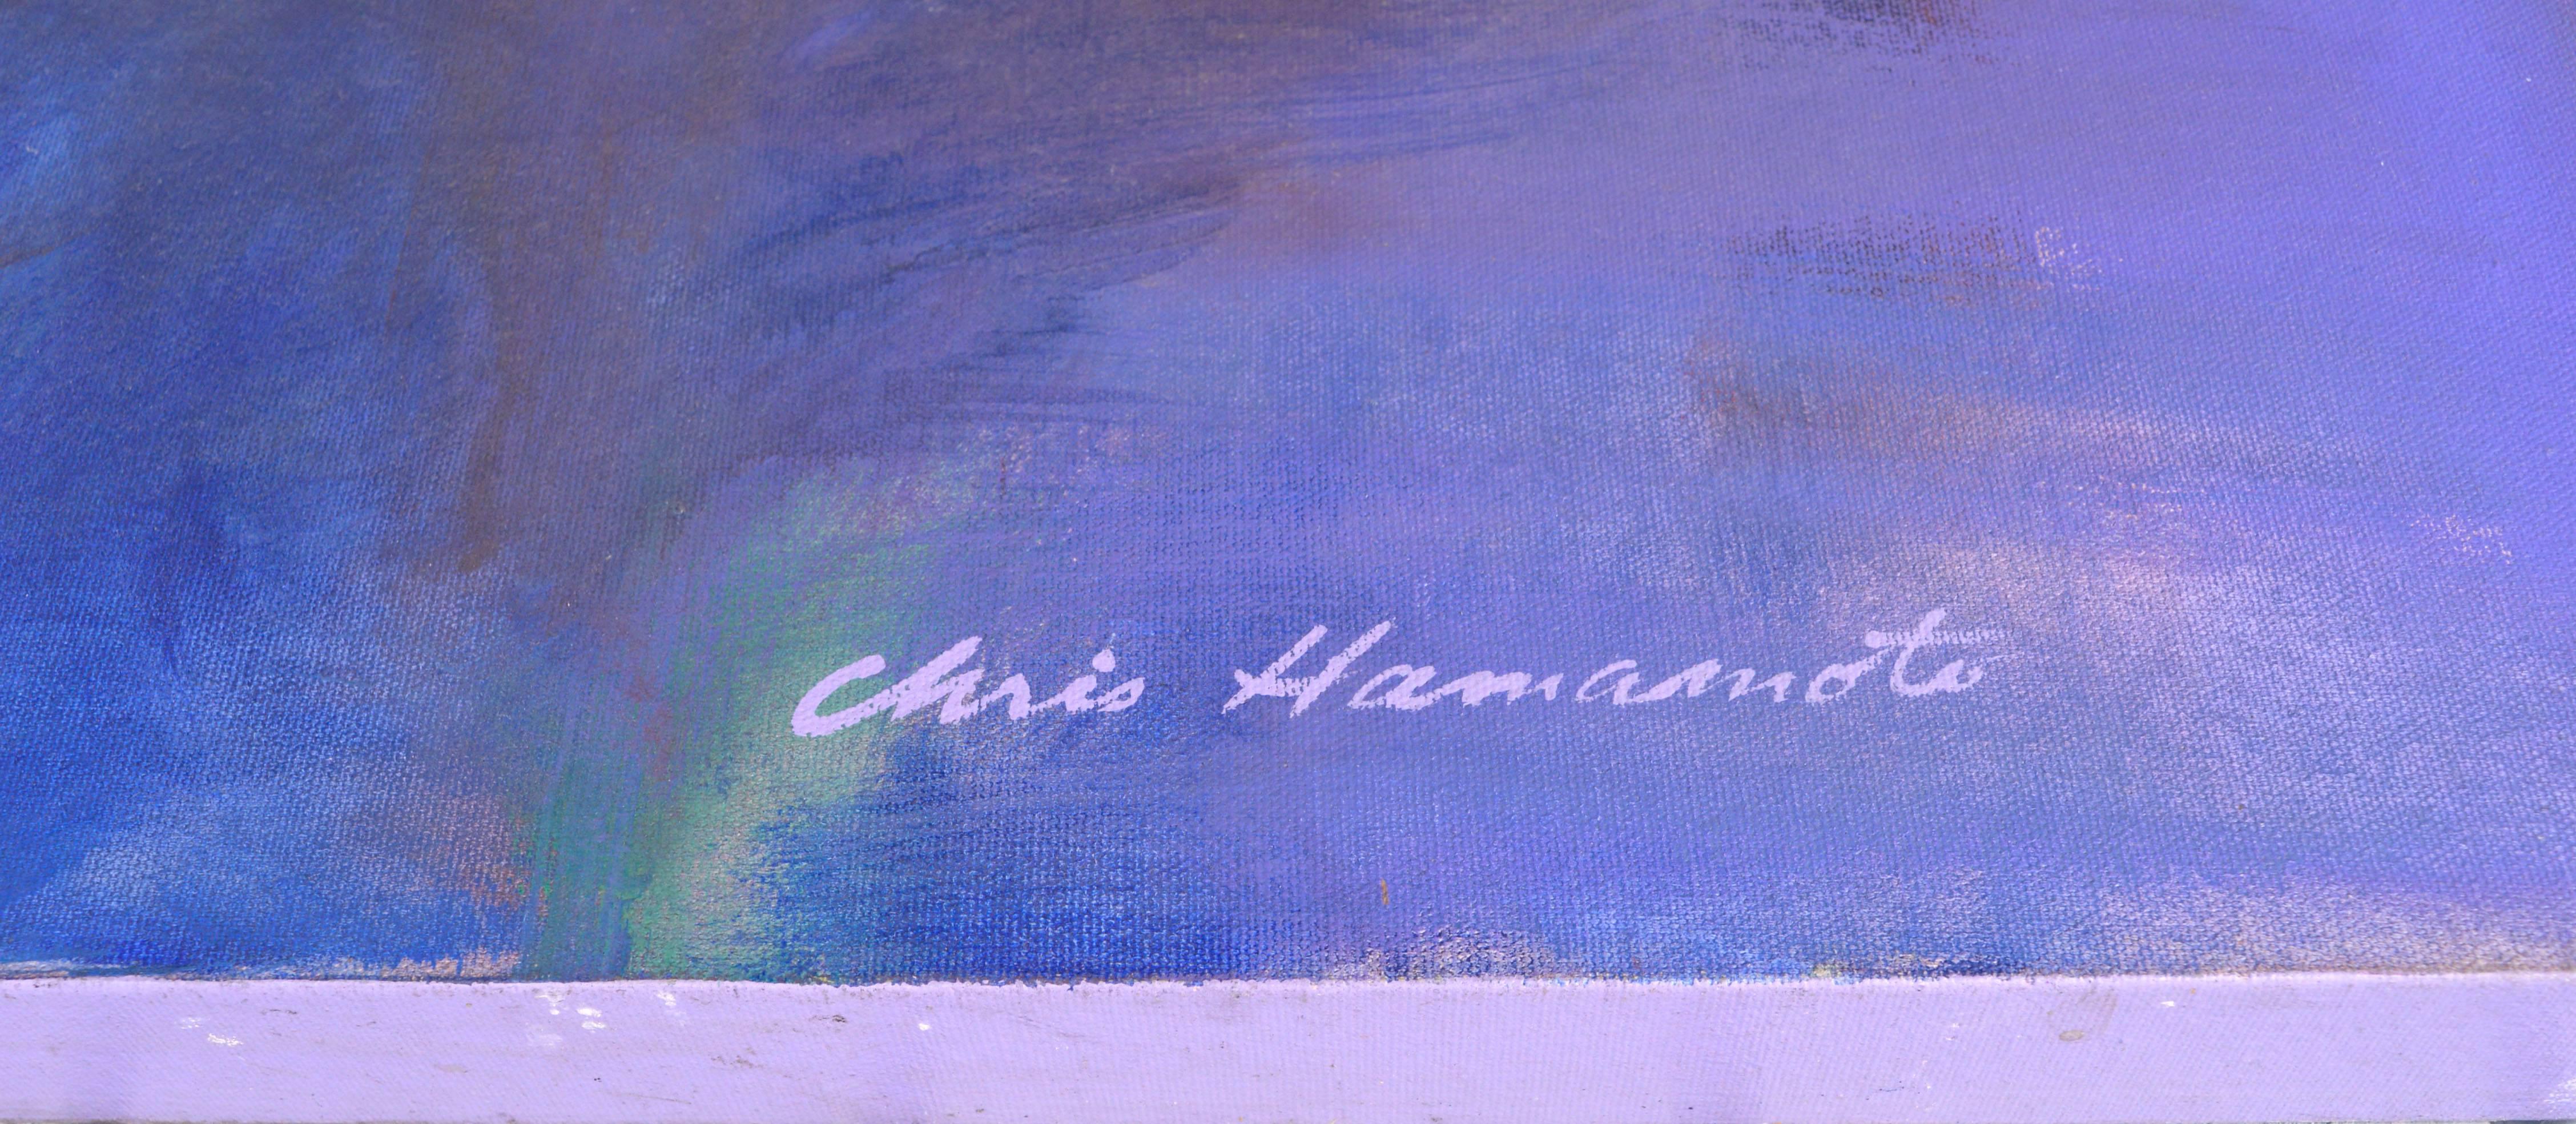 Fauvist Abstracted Dancer  - Abstract Expressionist Painting by Chris Hamamoto